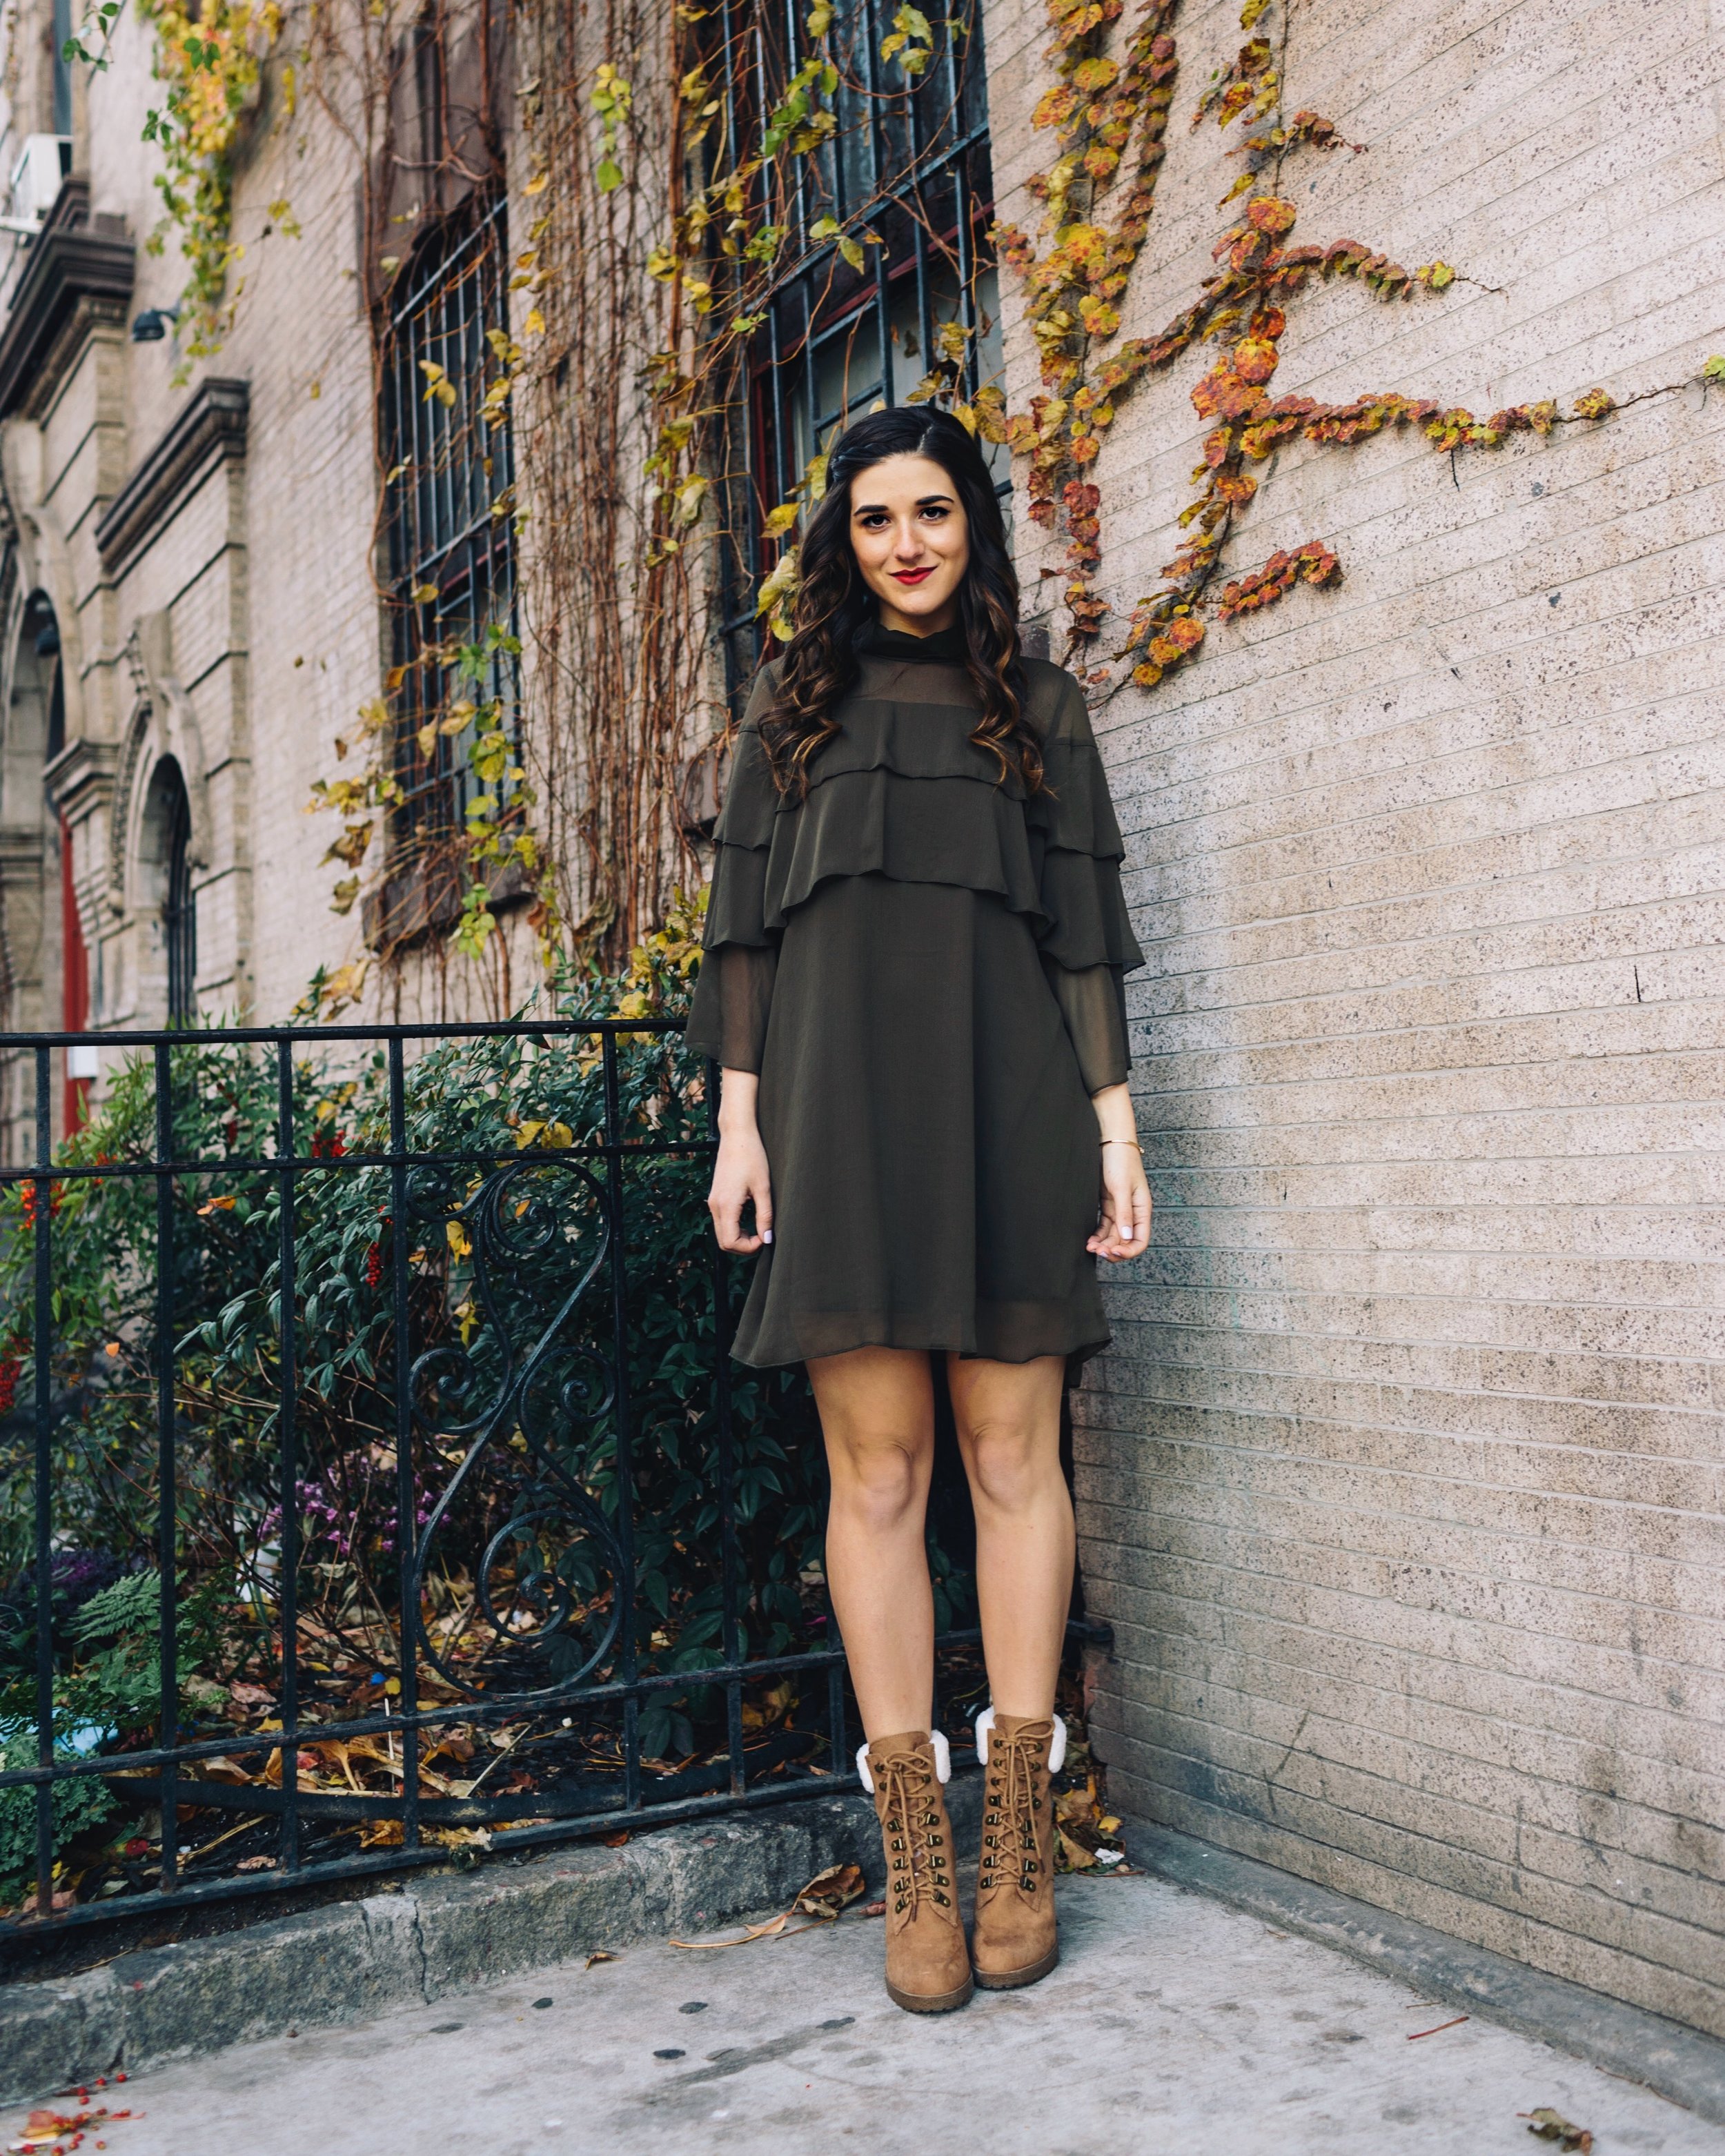 Olive Green Ruffle Dress + Lace Up Booties Payless Louboutins & Love Fashion Blog Esther Santer NYC Street Style Blogger Outfit OOTD Trendy Shoes Inspo Girly Fall Winter Hair Shopping Affordable Boots  Photoshoot Clothes Wear Bracelet Pretty Beautiful.JPG